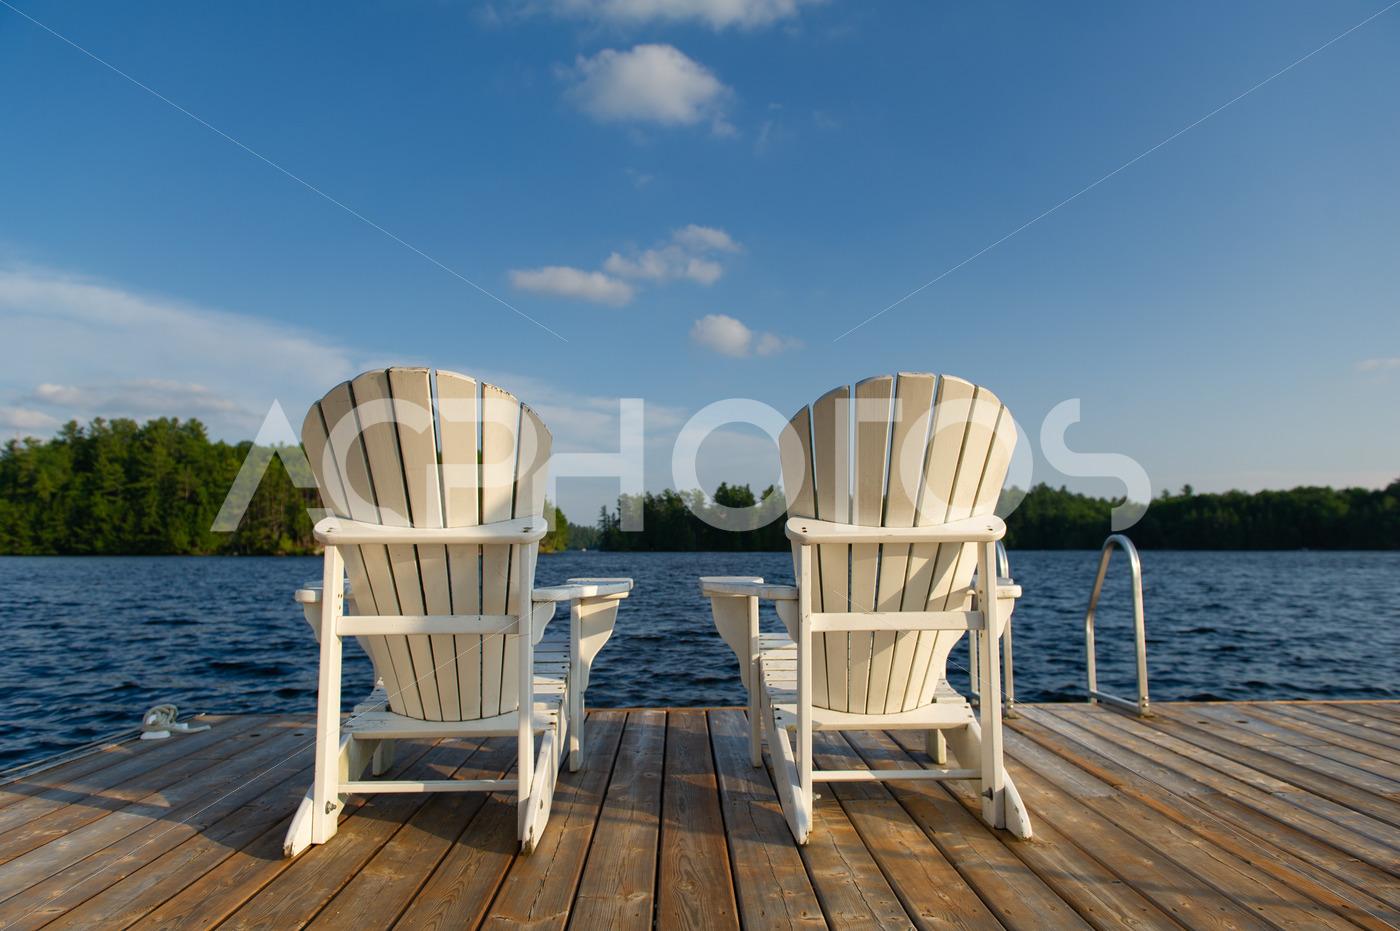 Adirondack chairs on a wooden dock 2576